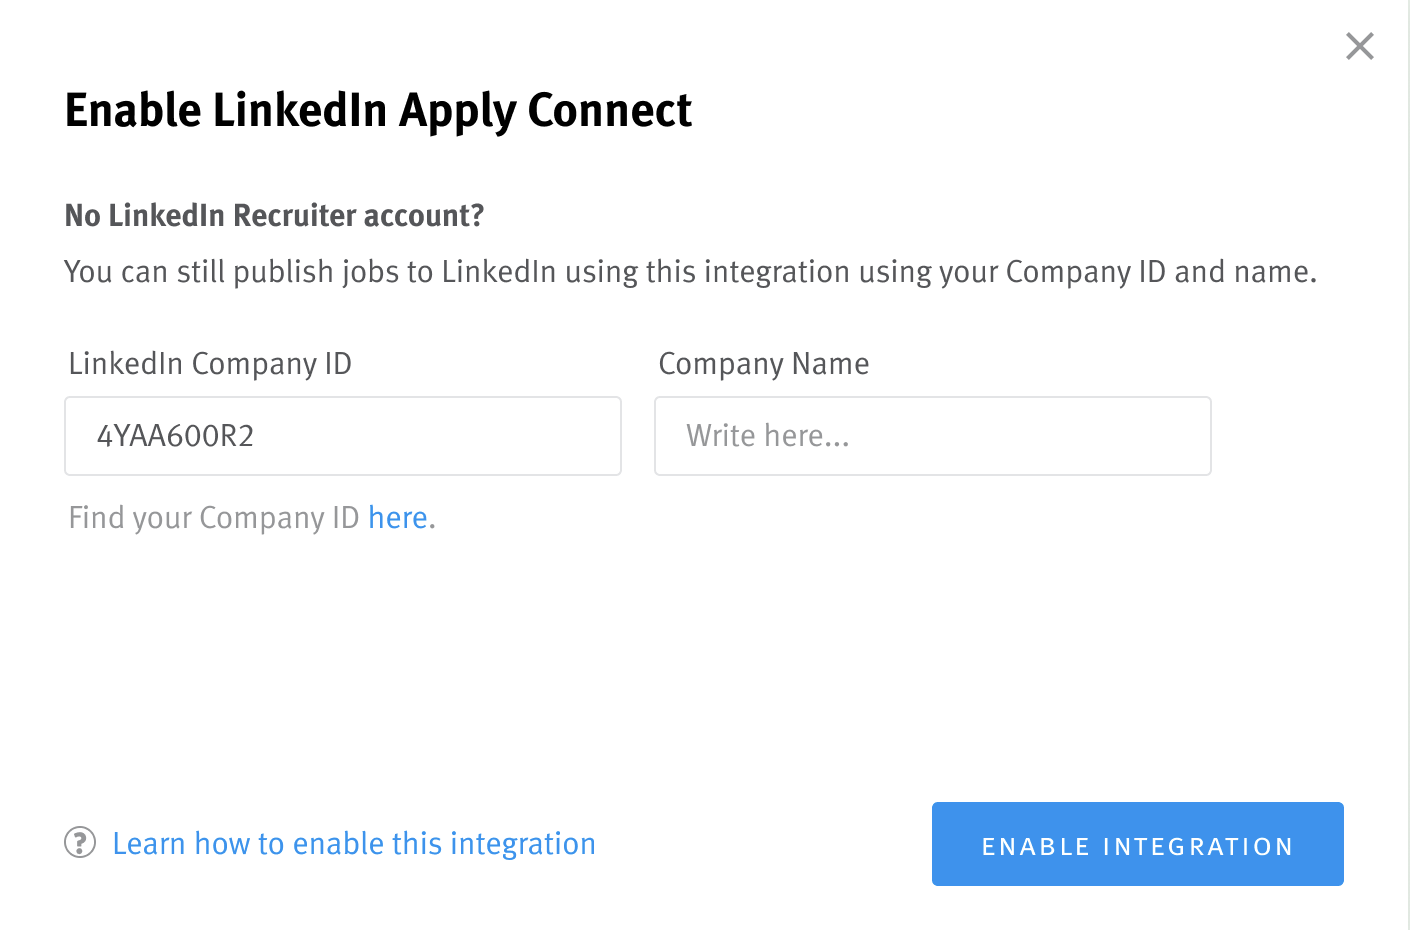 Enable LinkedIn Appli Connect modal with LinkedIn Company ID and Company Name fields